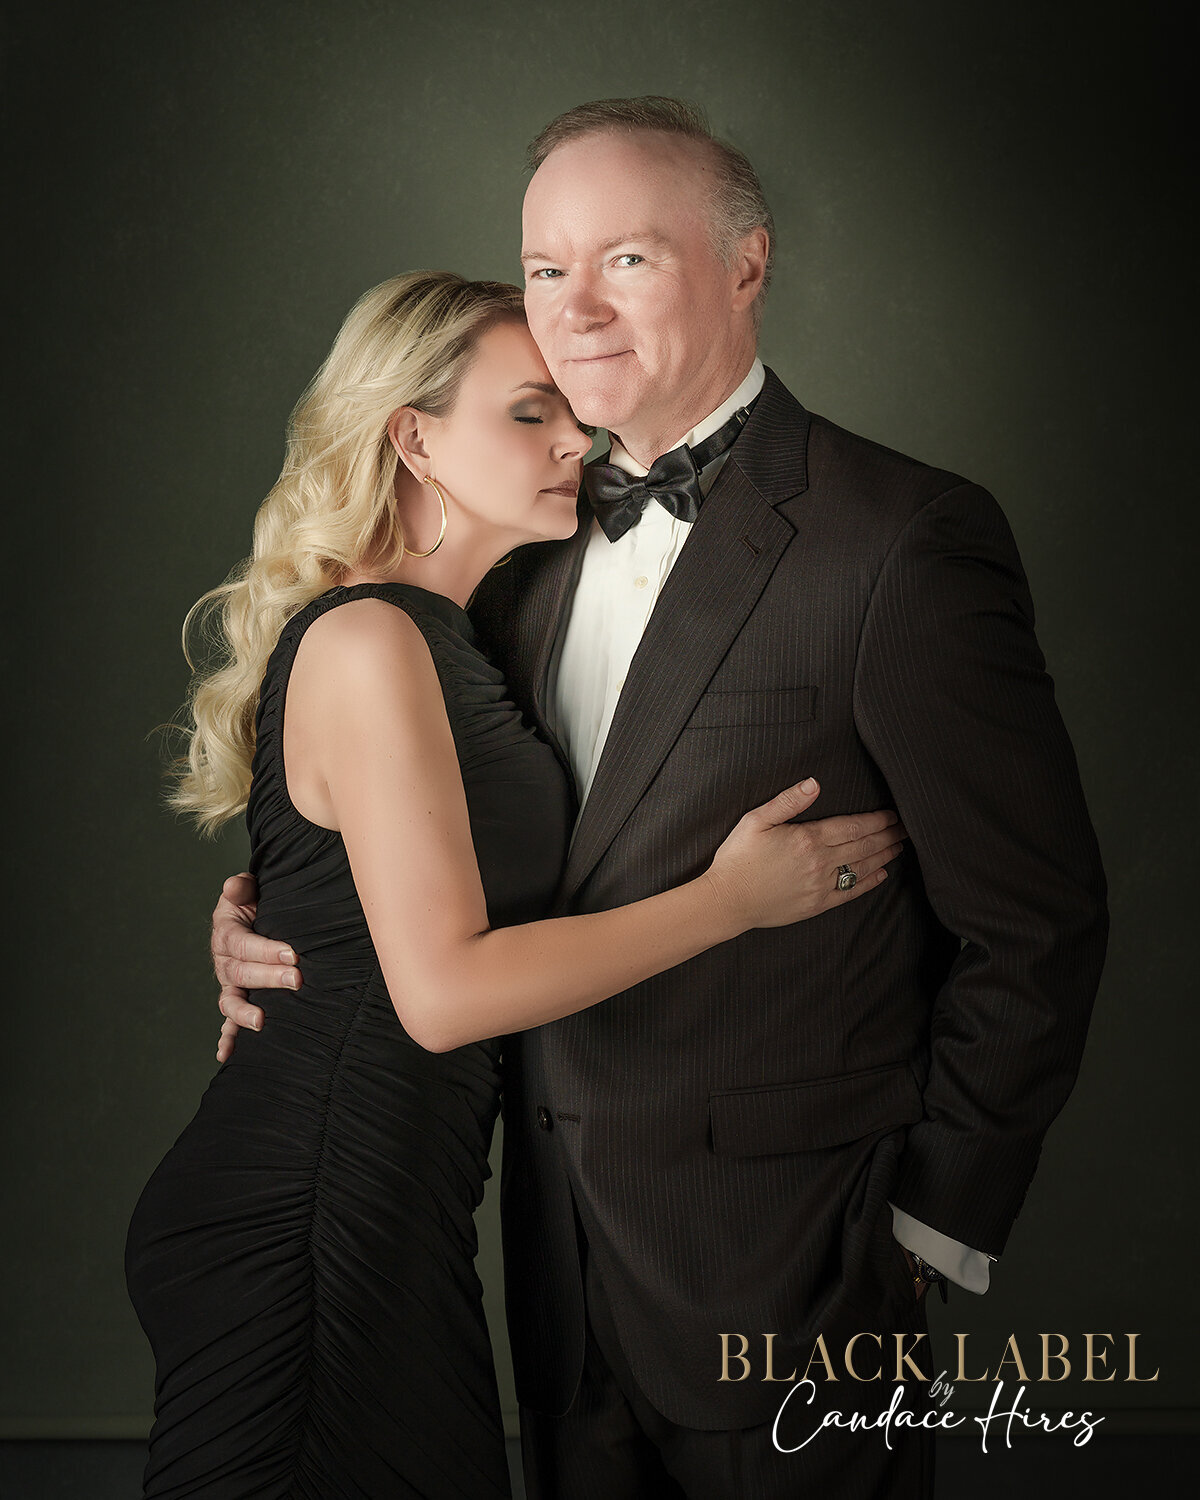 husband and wife photographed in black ball gown and black tuxedo in studio